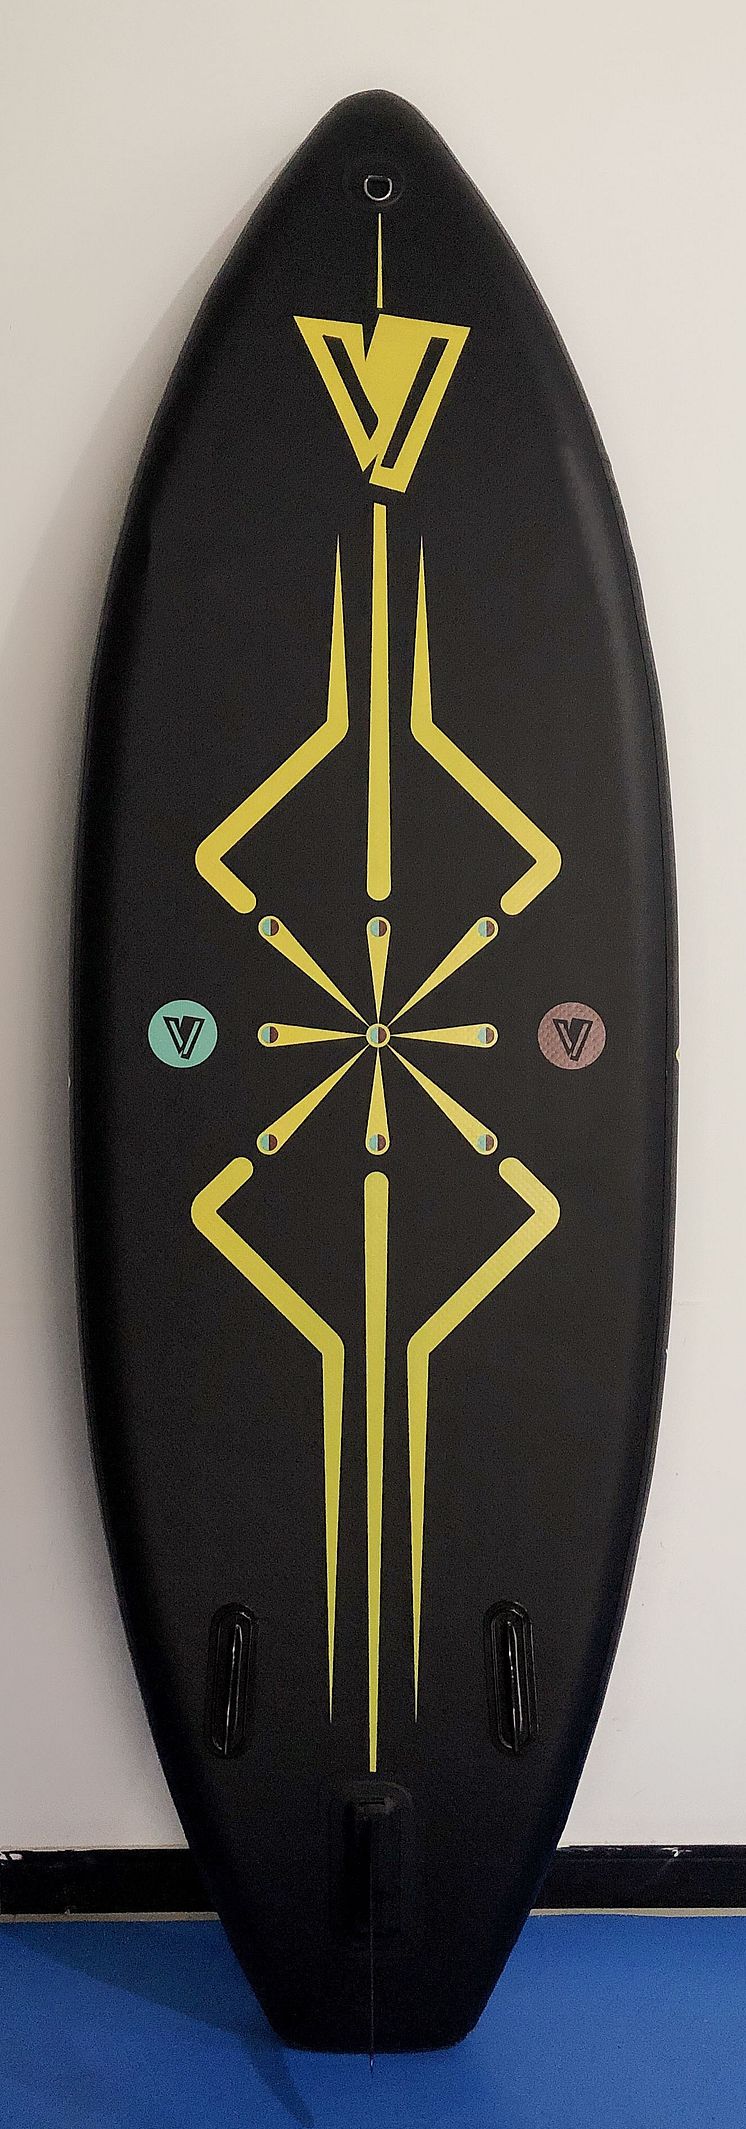 Hi-res image - VETUS - The YellowV Heartbeat YVSUP09 SUP is for the rough white-water adventurer 